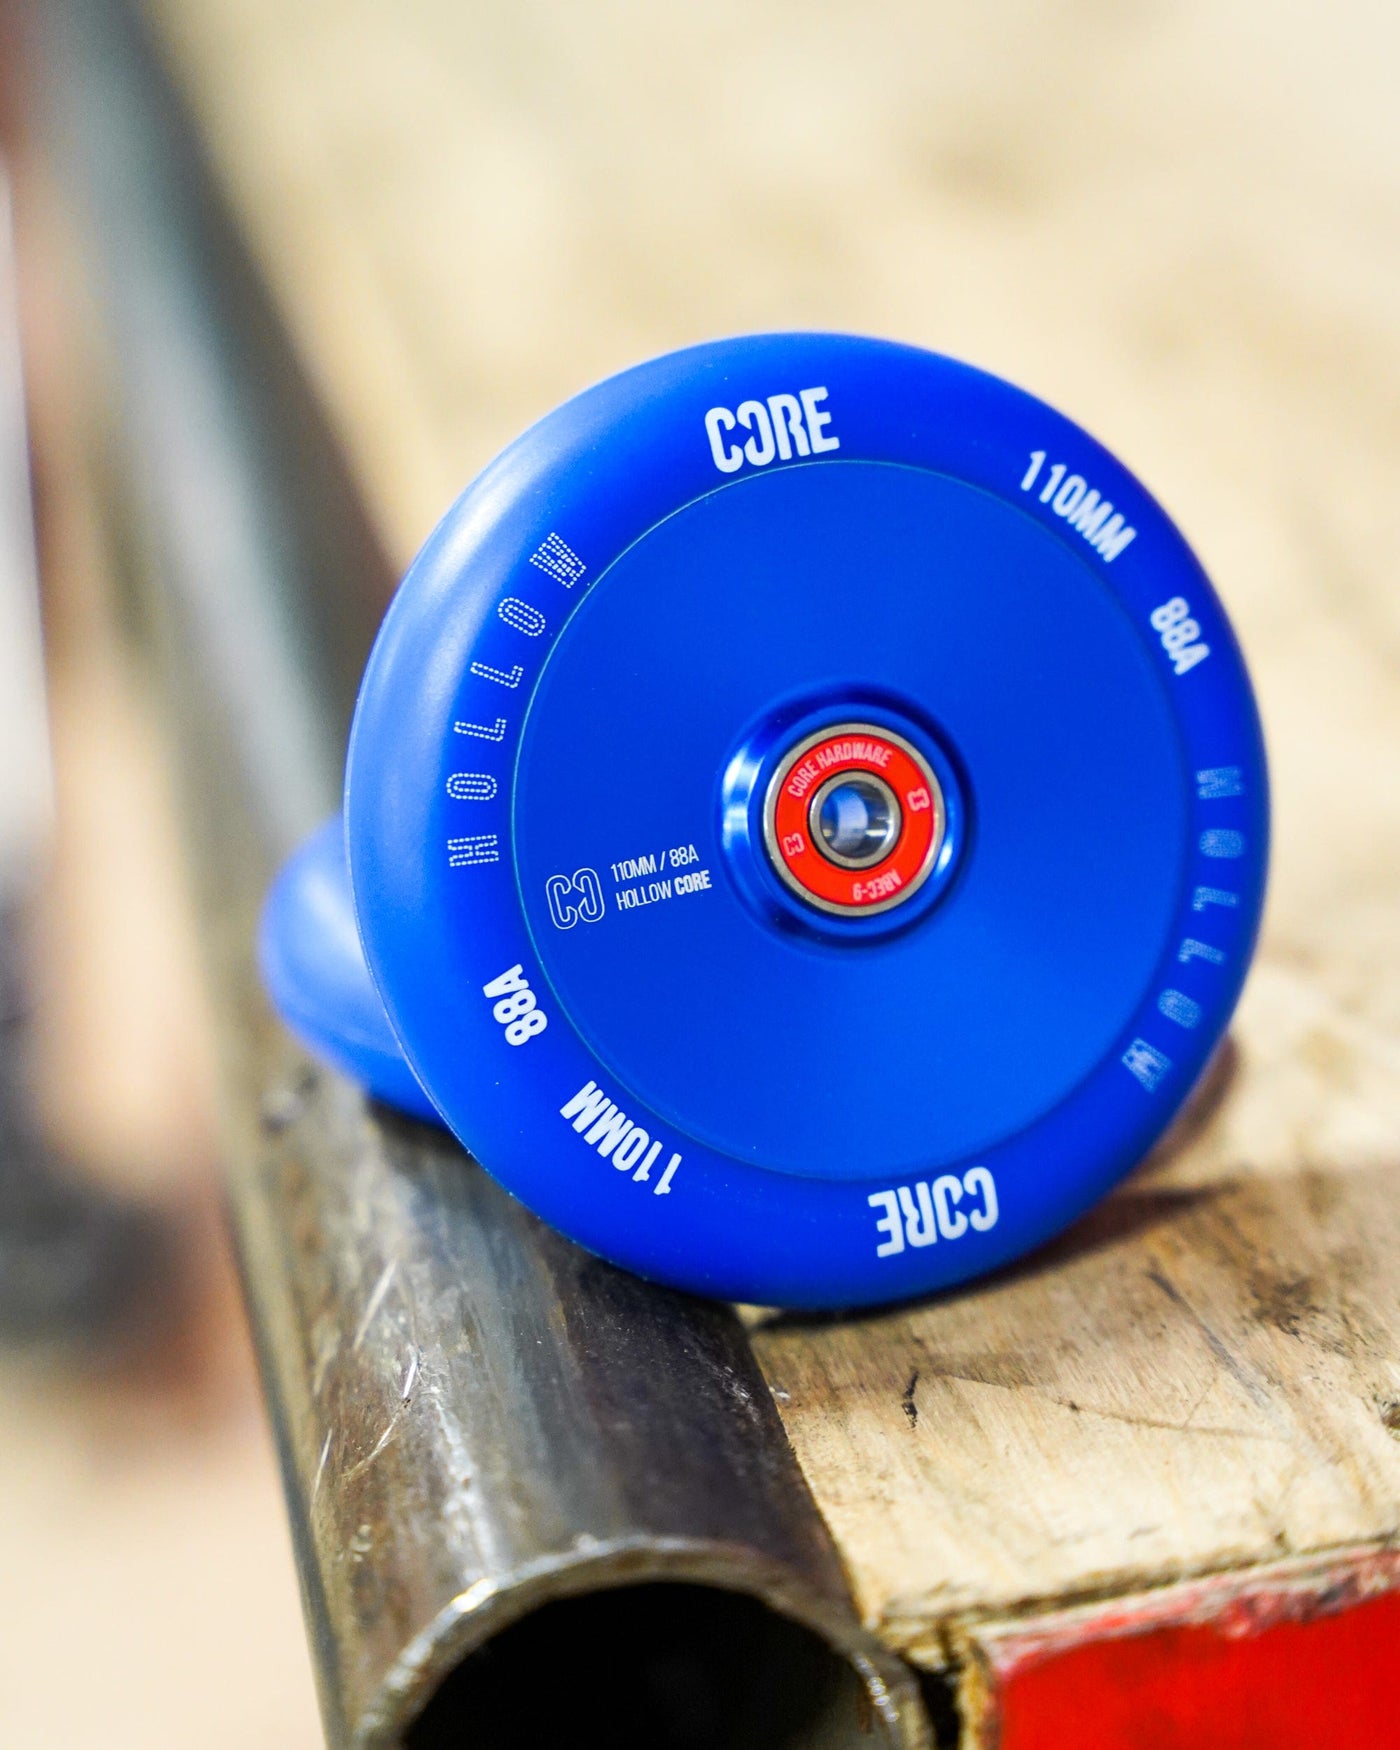 CORE Hex Hollow Stunt V2 Blue Scooter Wheel 110mm I Scooter Wheel Pair Leaning